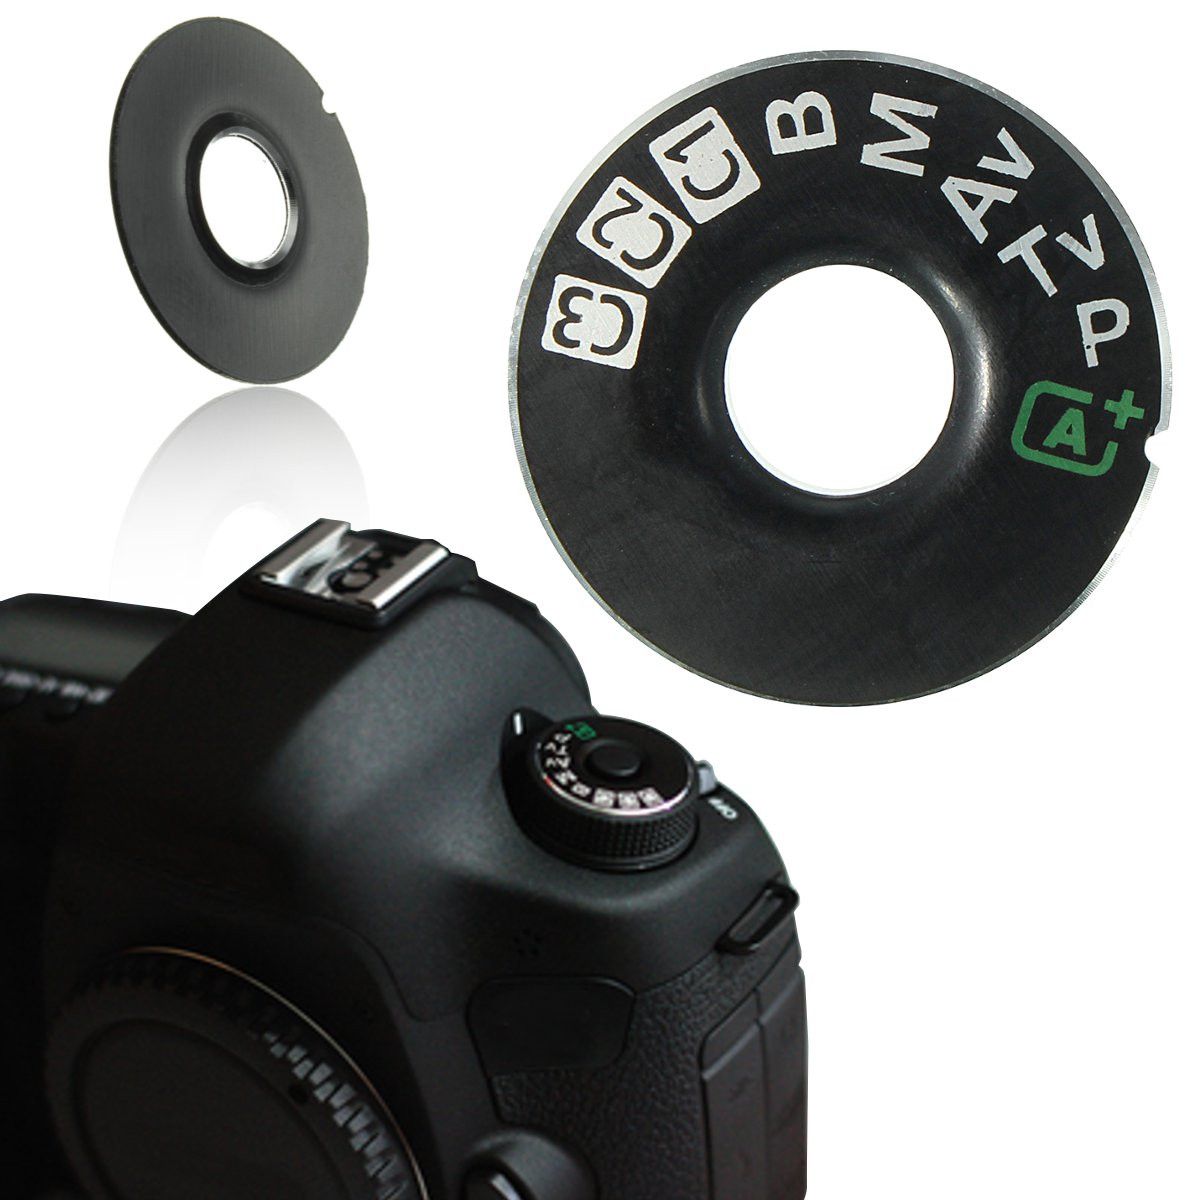 Replacement-Dial-Mode-Interface-Cap-For-Canon-EOS-5D-Mark-III-5D3-Part-1159743